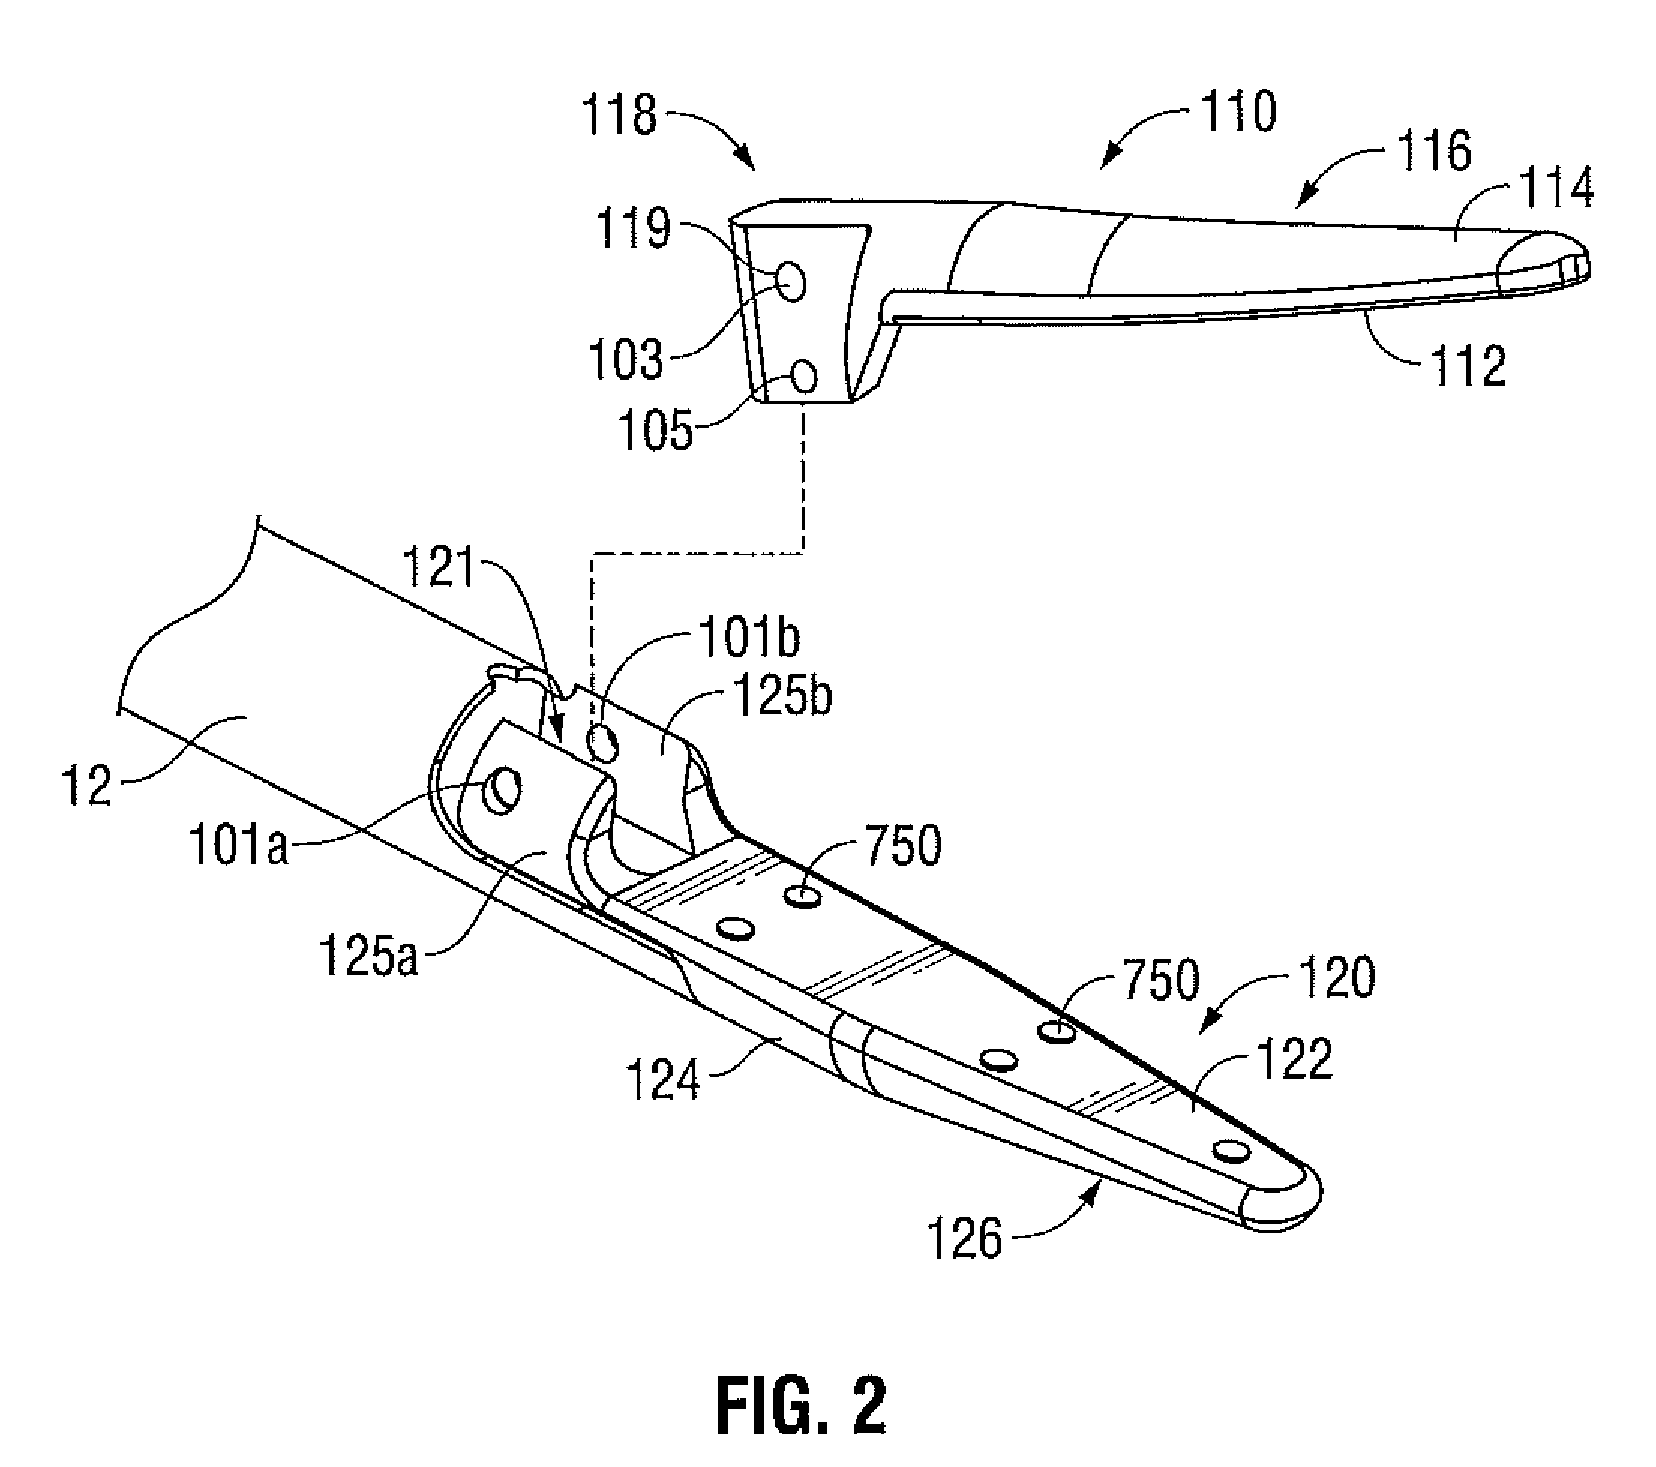 Apparatus, System, and Method for Performing an Endoscopic Electrosurgical Procedure